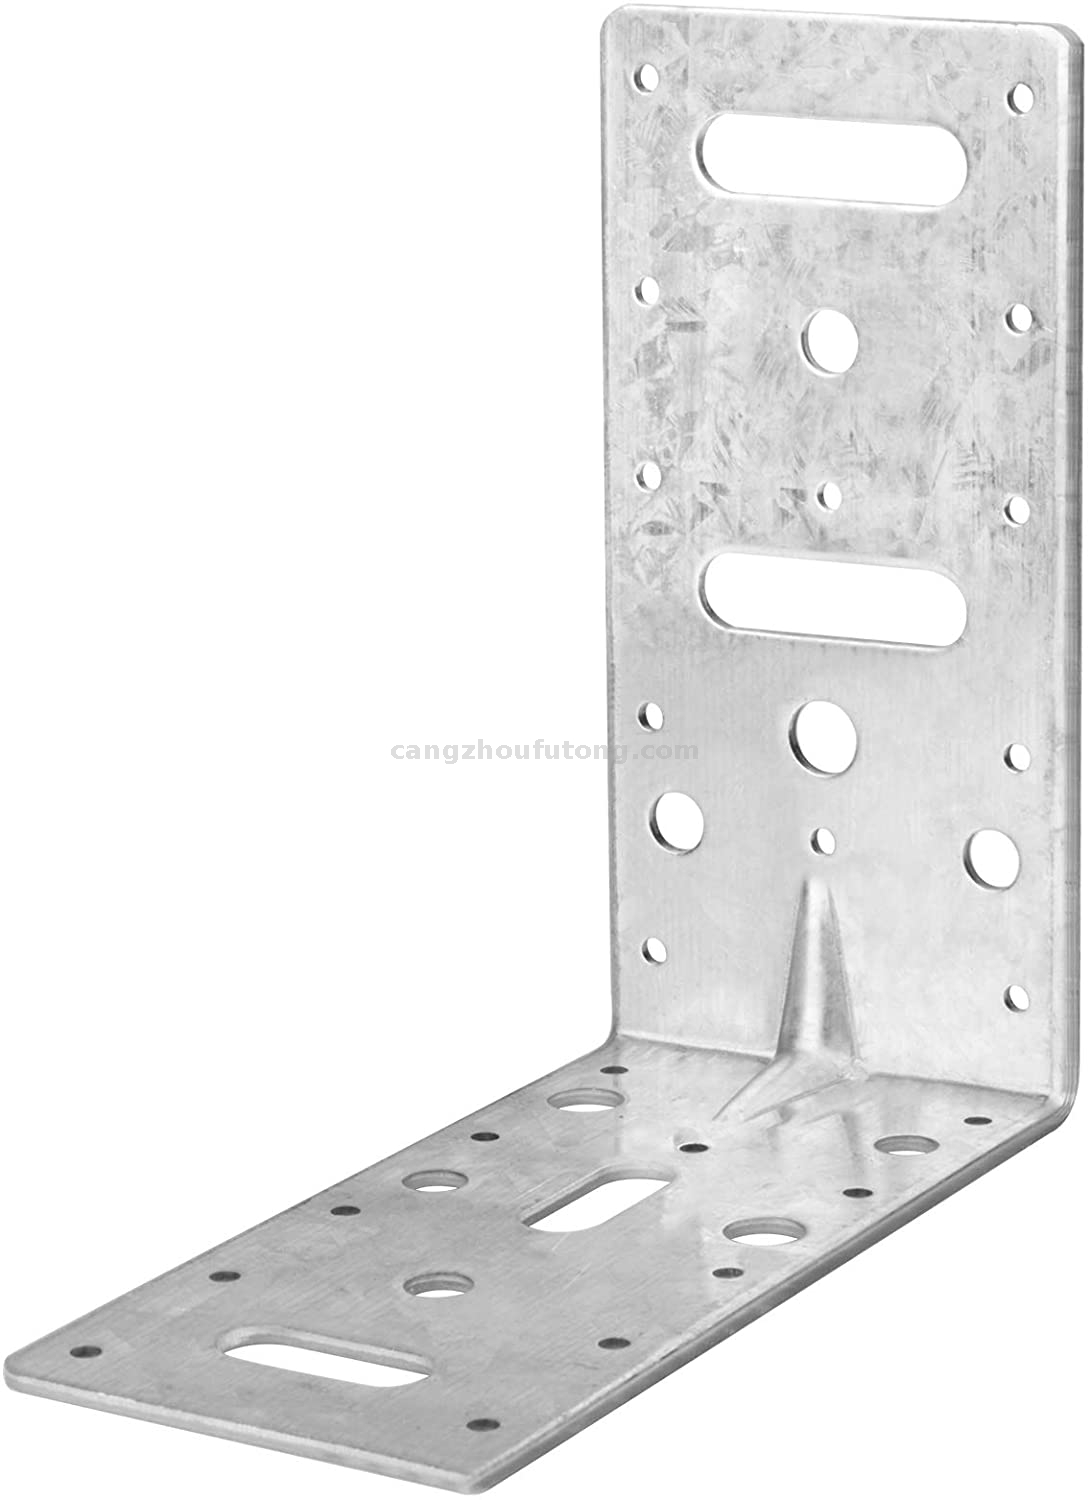 6 Inch Steel L Right Angle Bracket Tie Plate Metal Joint Thickness 2.5mm Reinforcing Rib Strengthen Corner Brace for Timber Shelves Connector